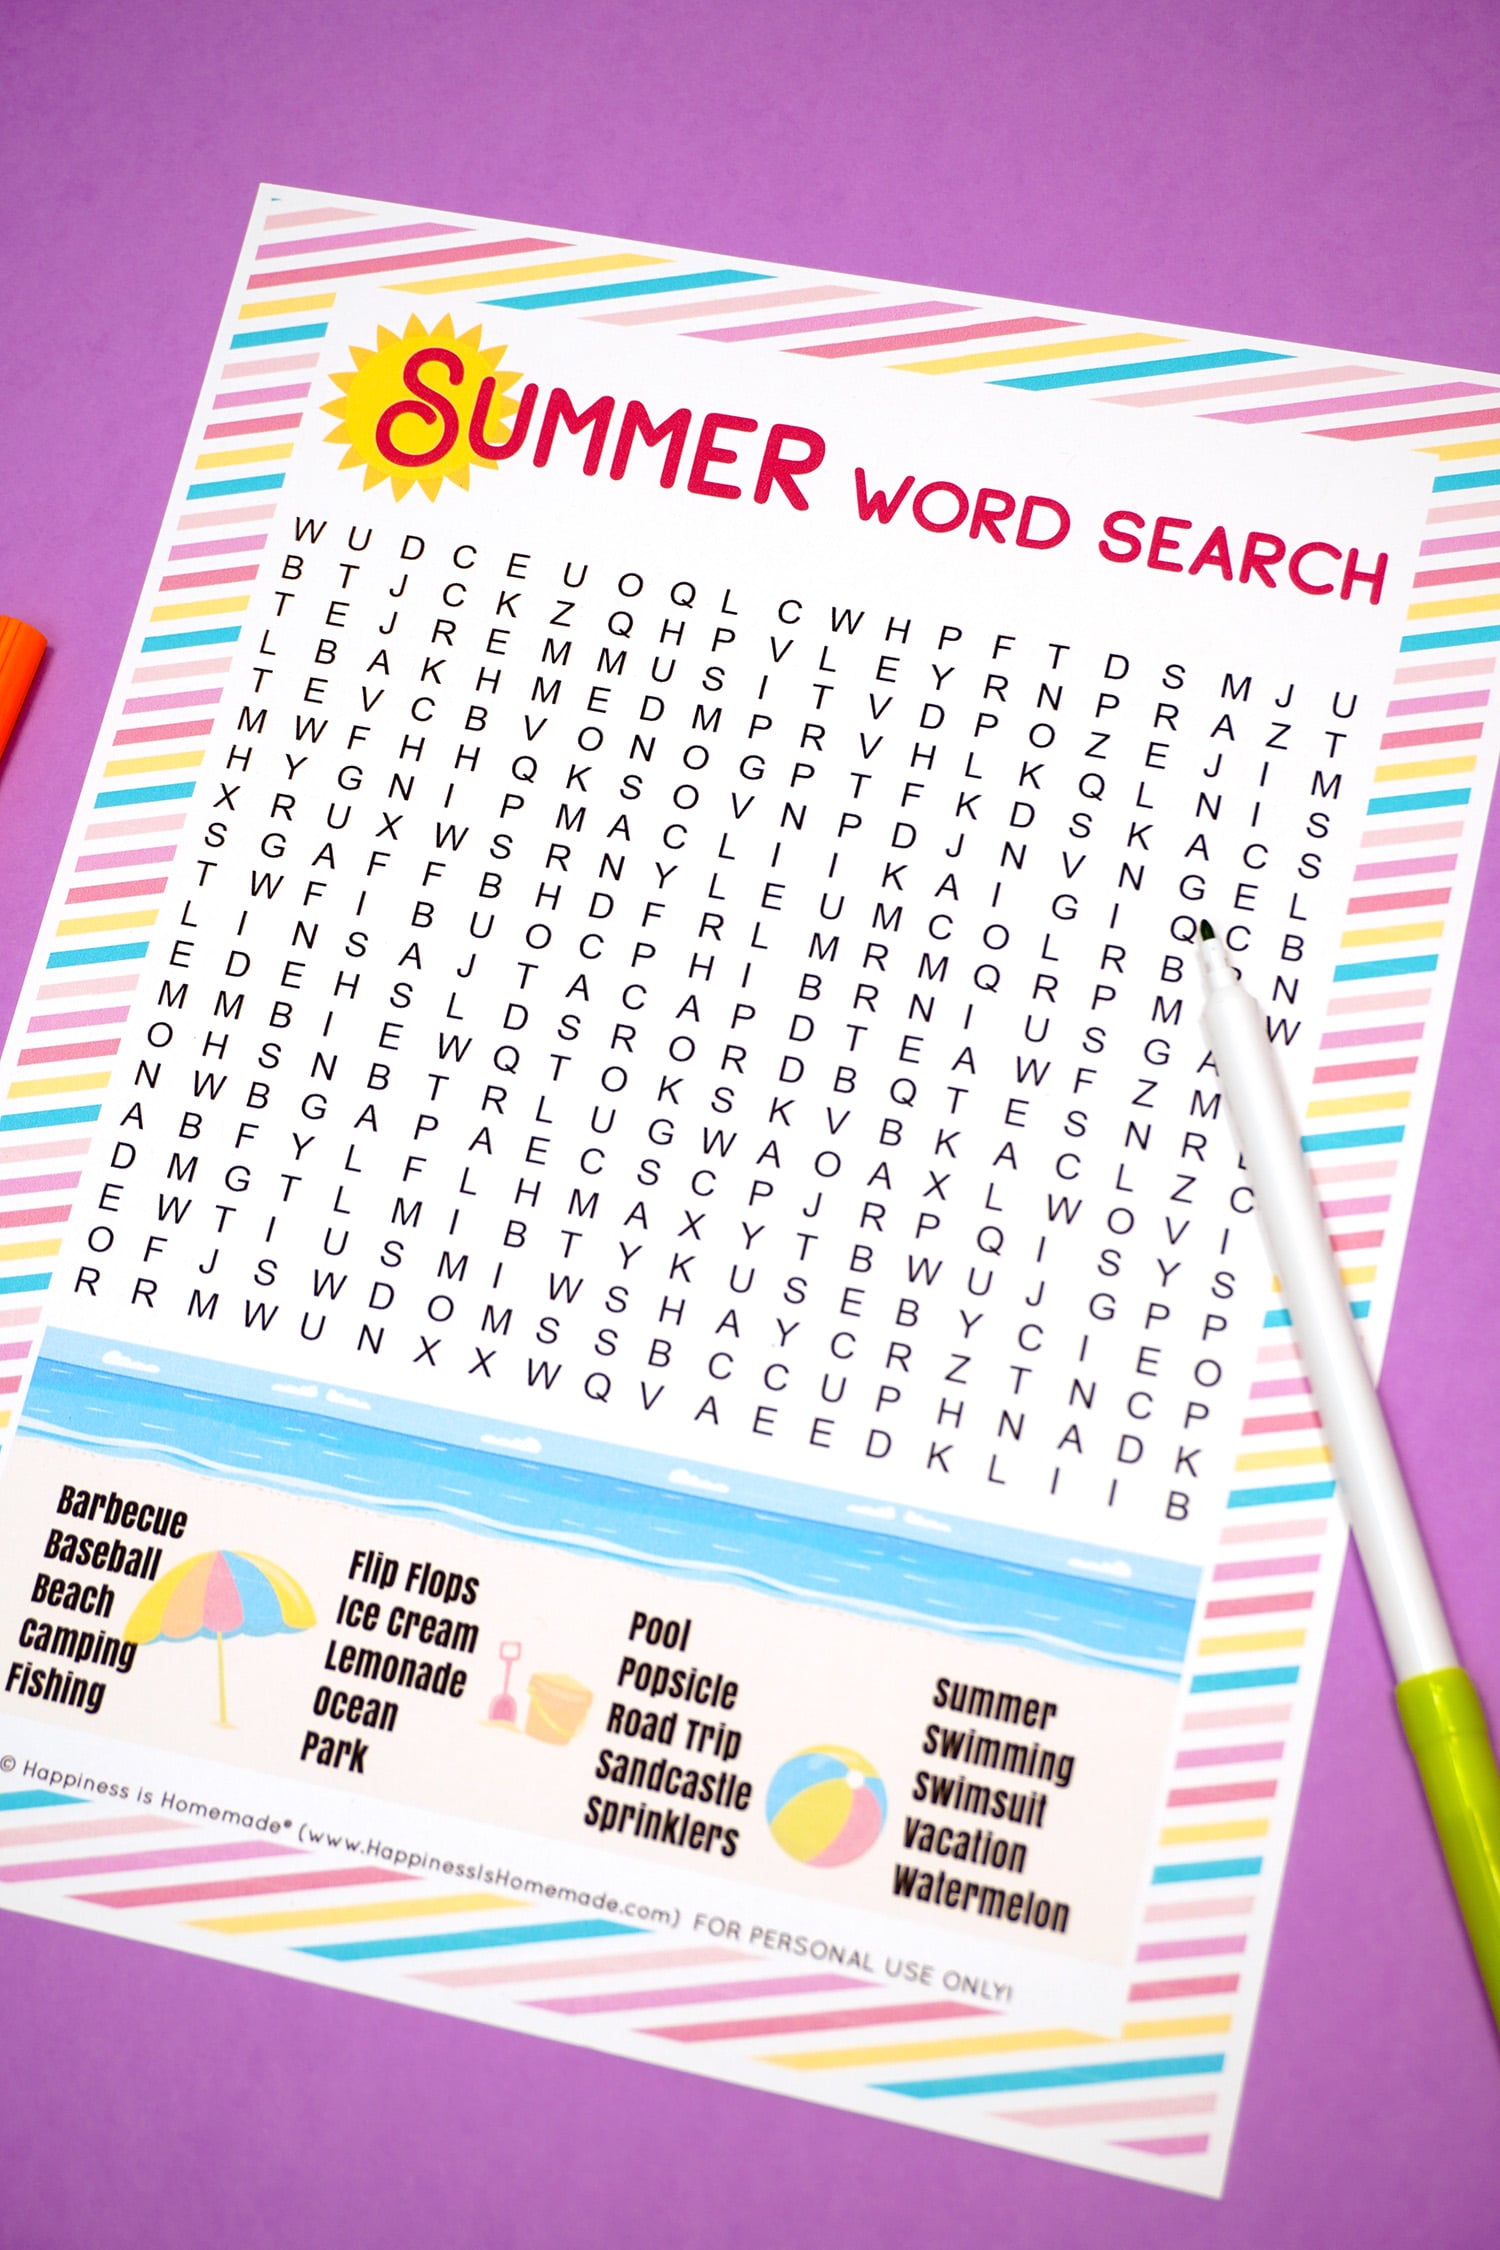 Summer word search on purple background with green marker